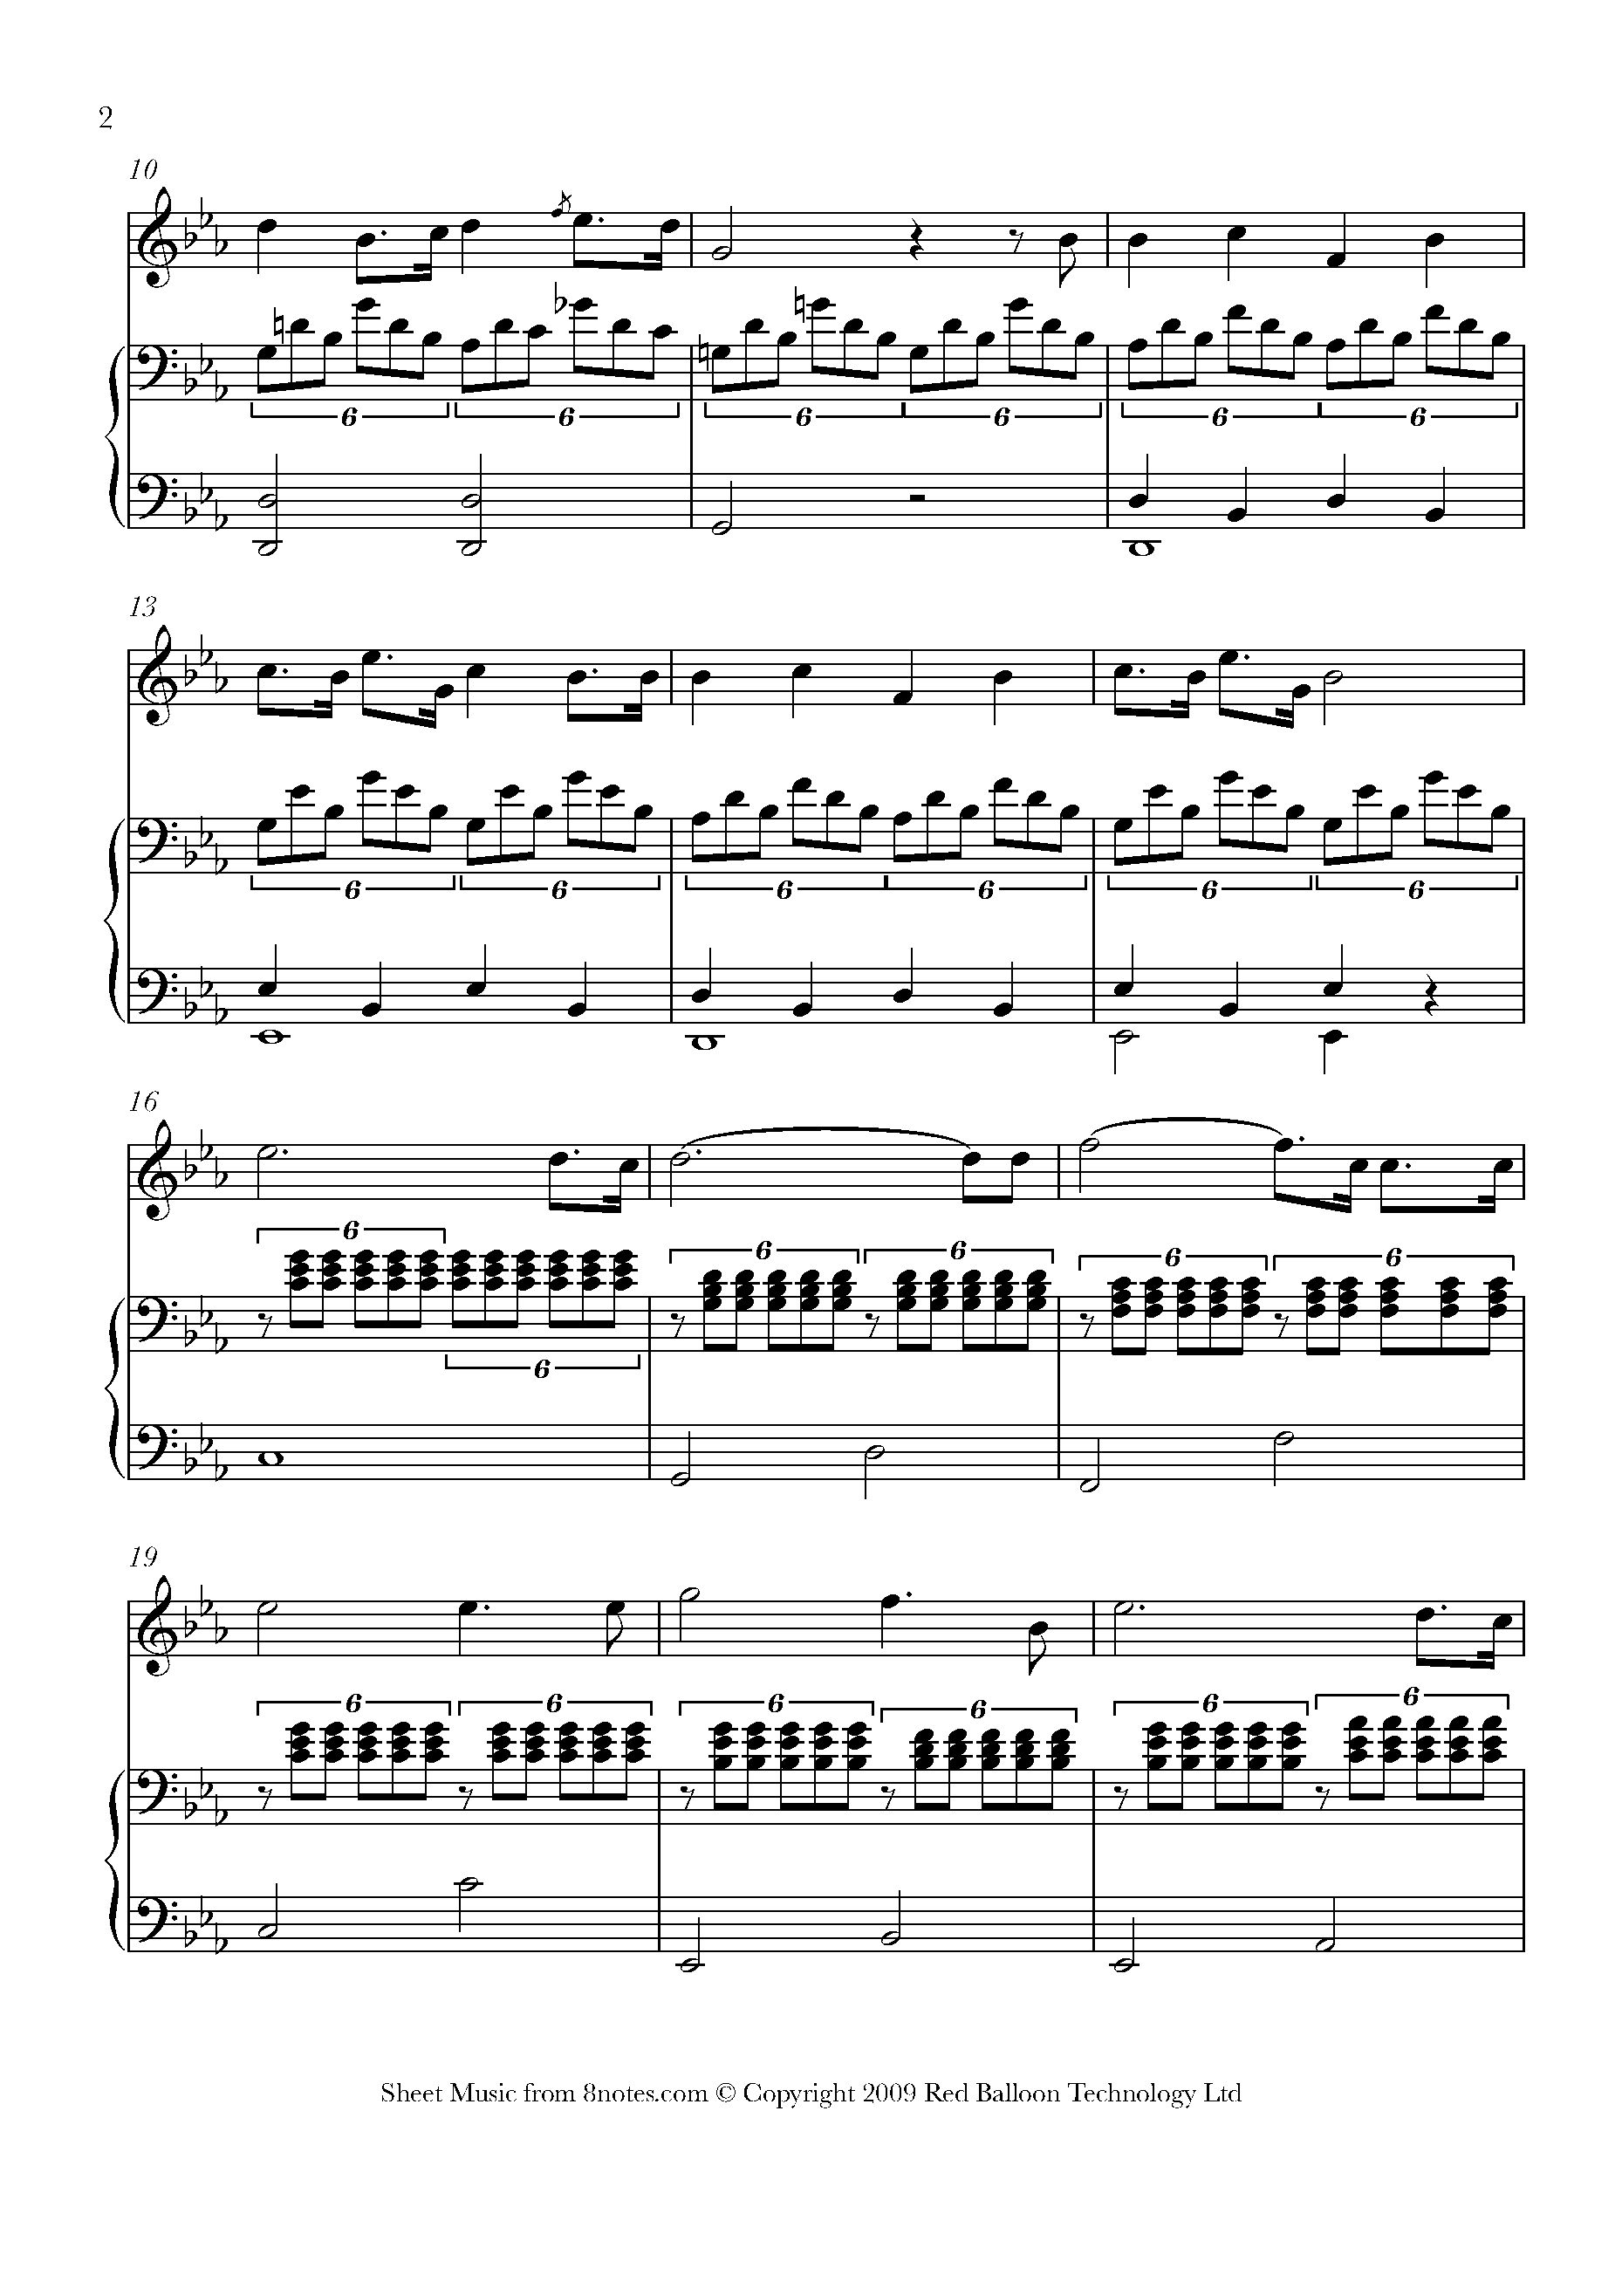 Lindsey Stirling O Holy Night Sheet Music (Piano Solo) in F# Minor -  Download & Print - SKU: MN0264040